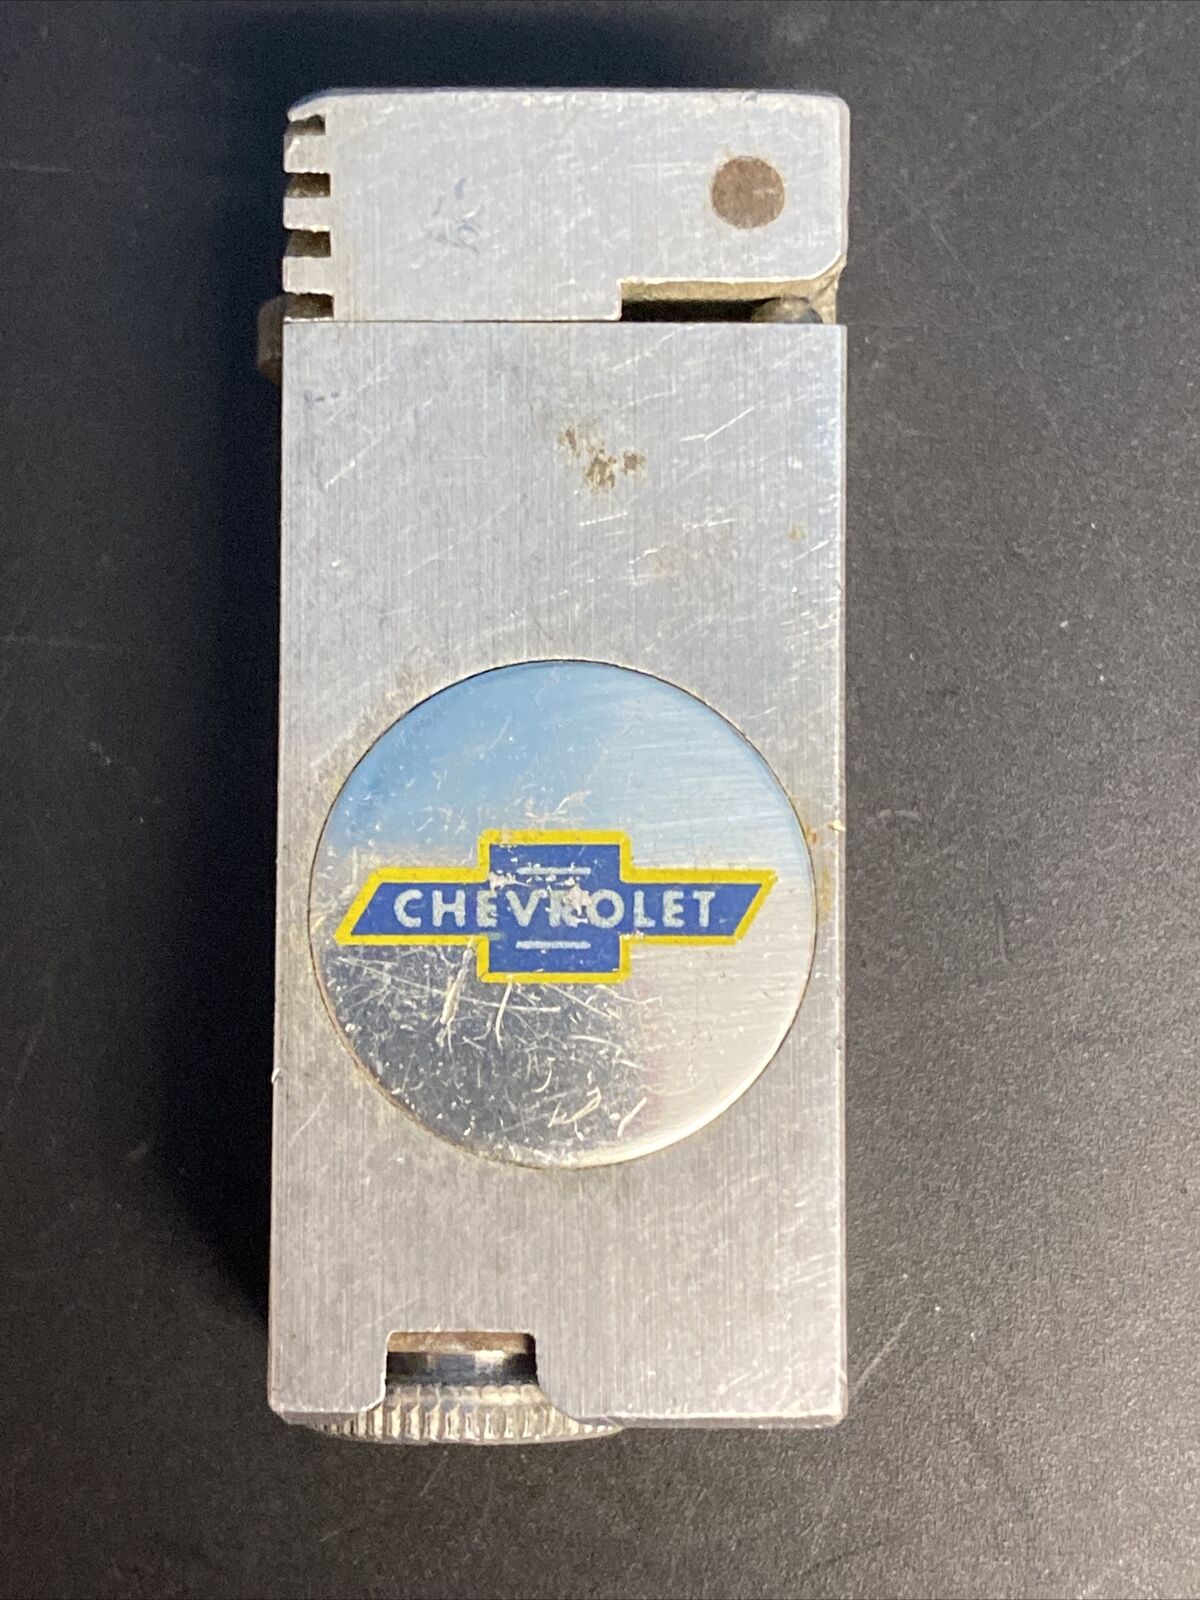 Chevrolet Vintage Silver Color Lighter- Blue Chevrolet Logo With Yellow Trim